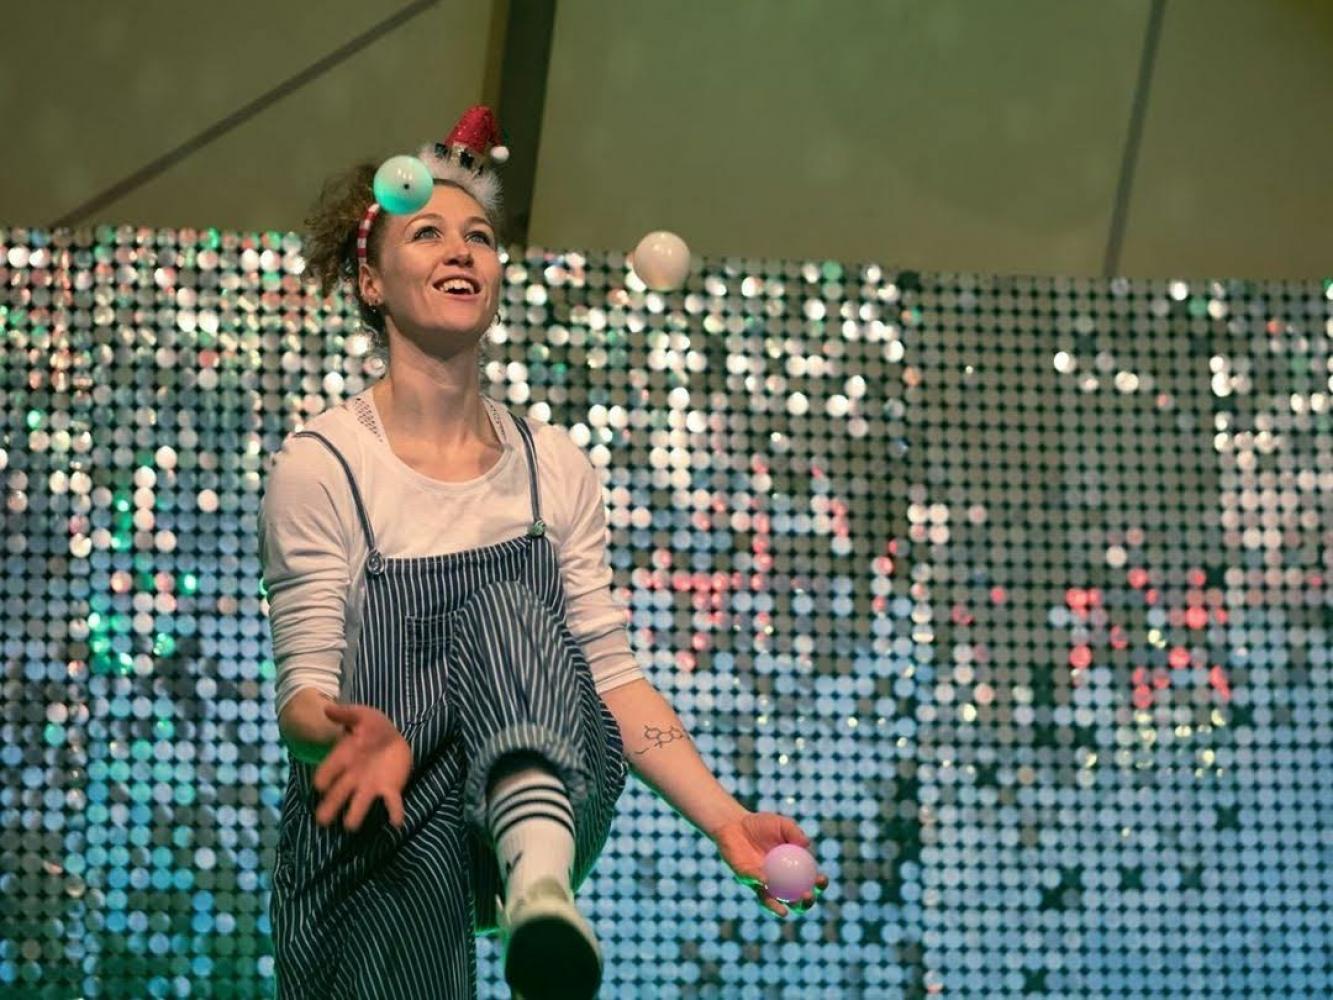 A dancer does a superhero pose in profile - one arm outstretched and a leg lifted behind her, in front of a colourful stall